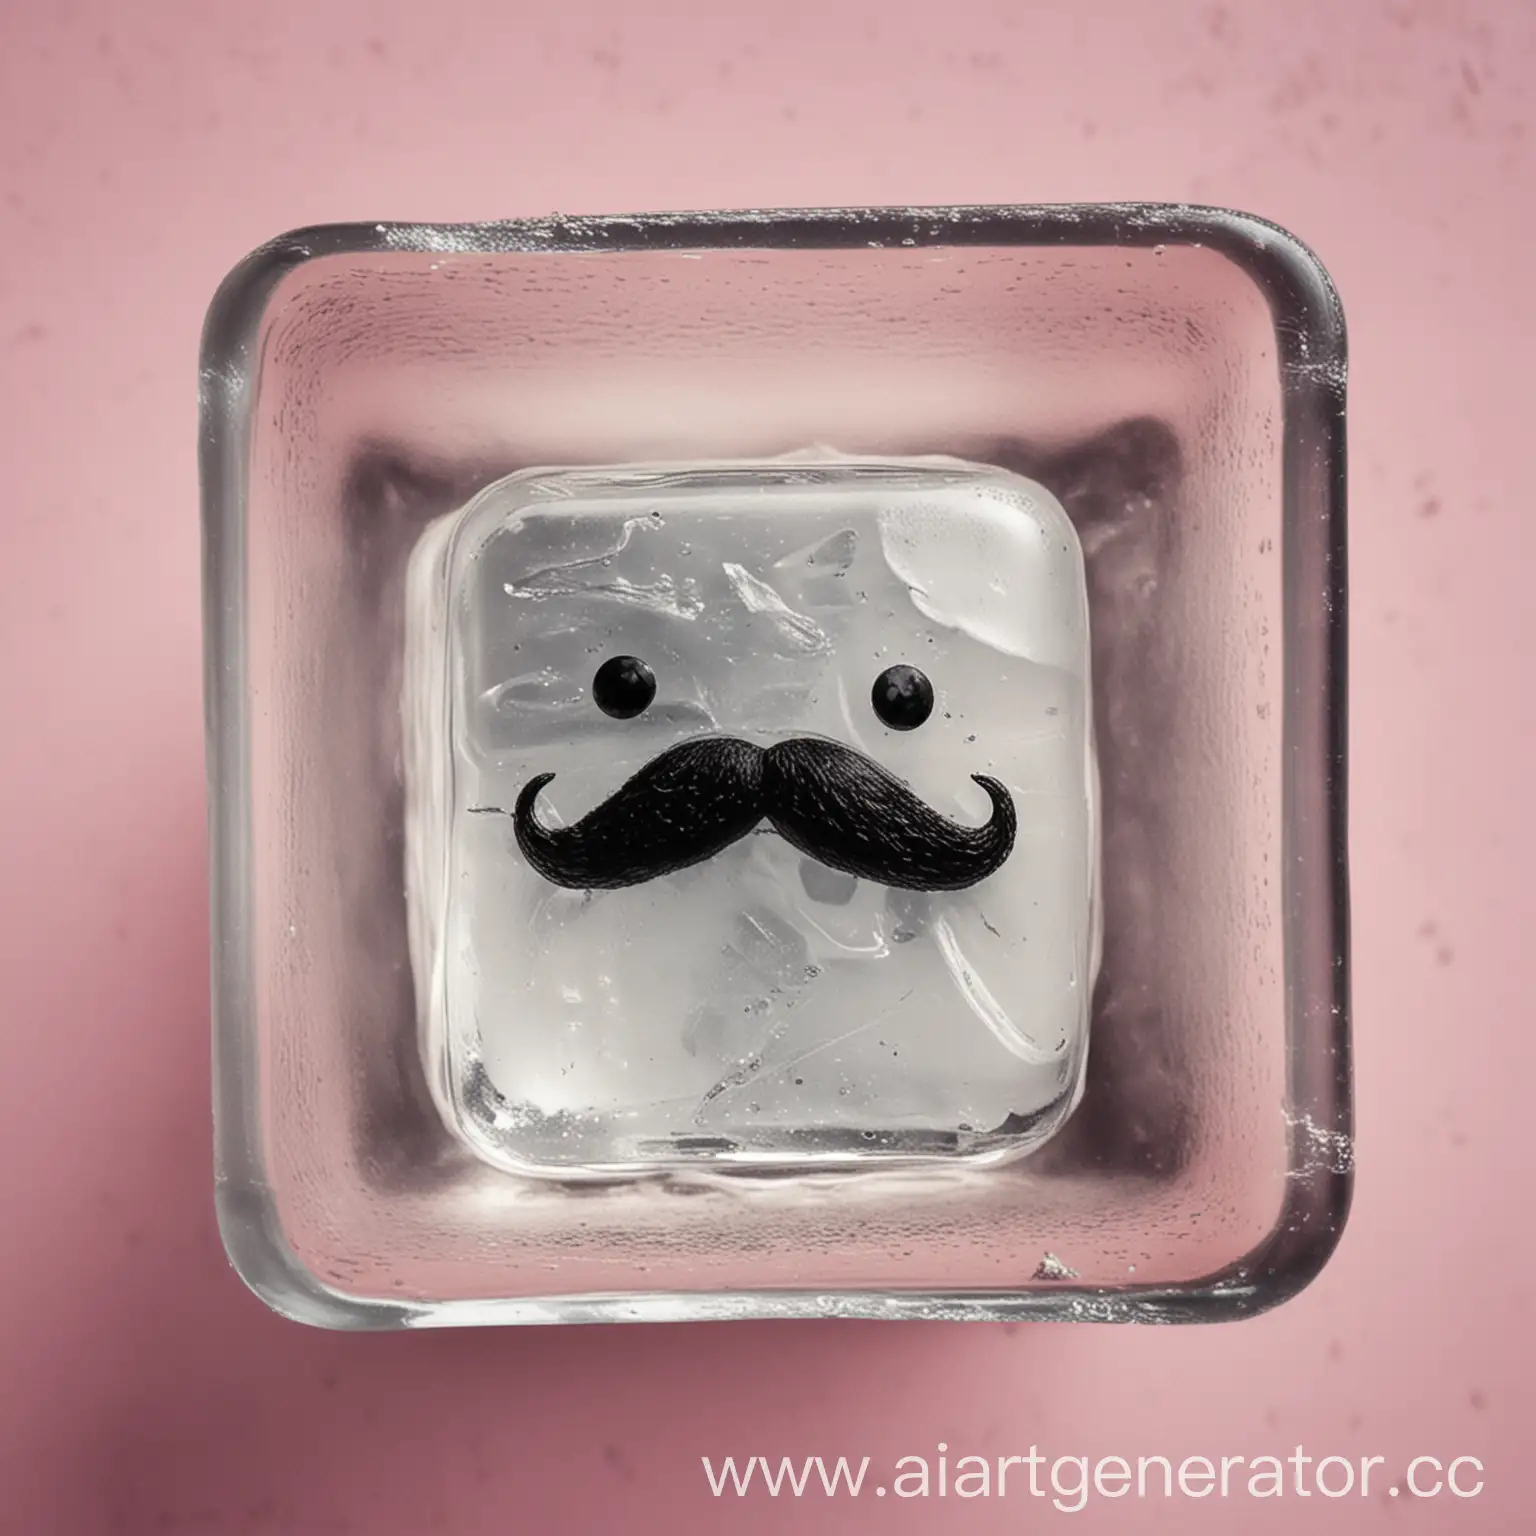 mustache in an ice cube
